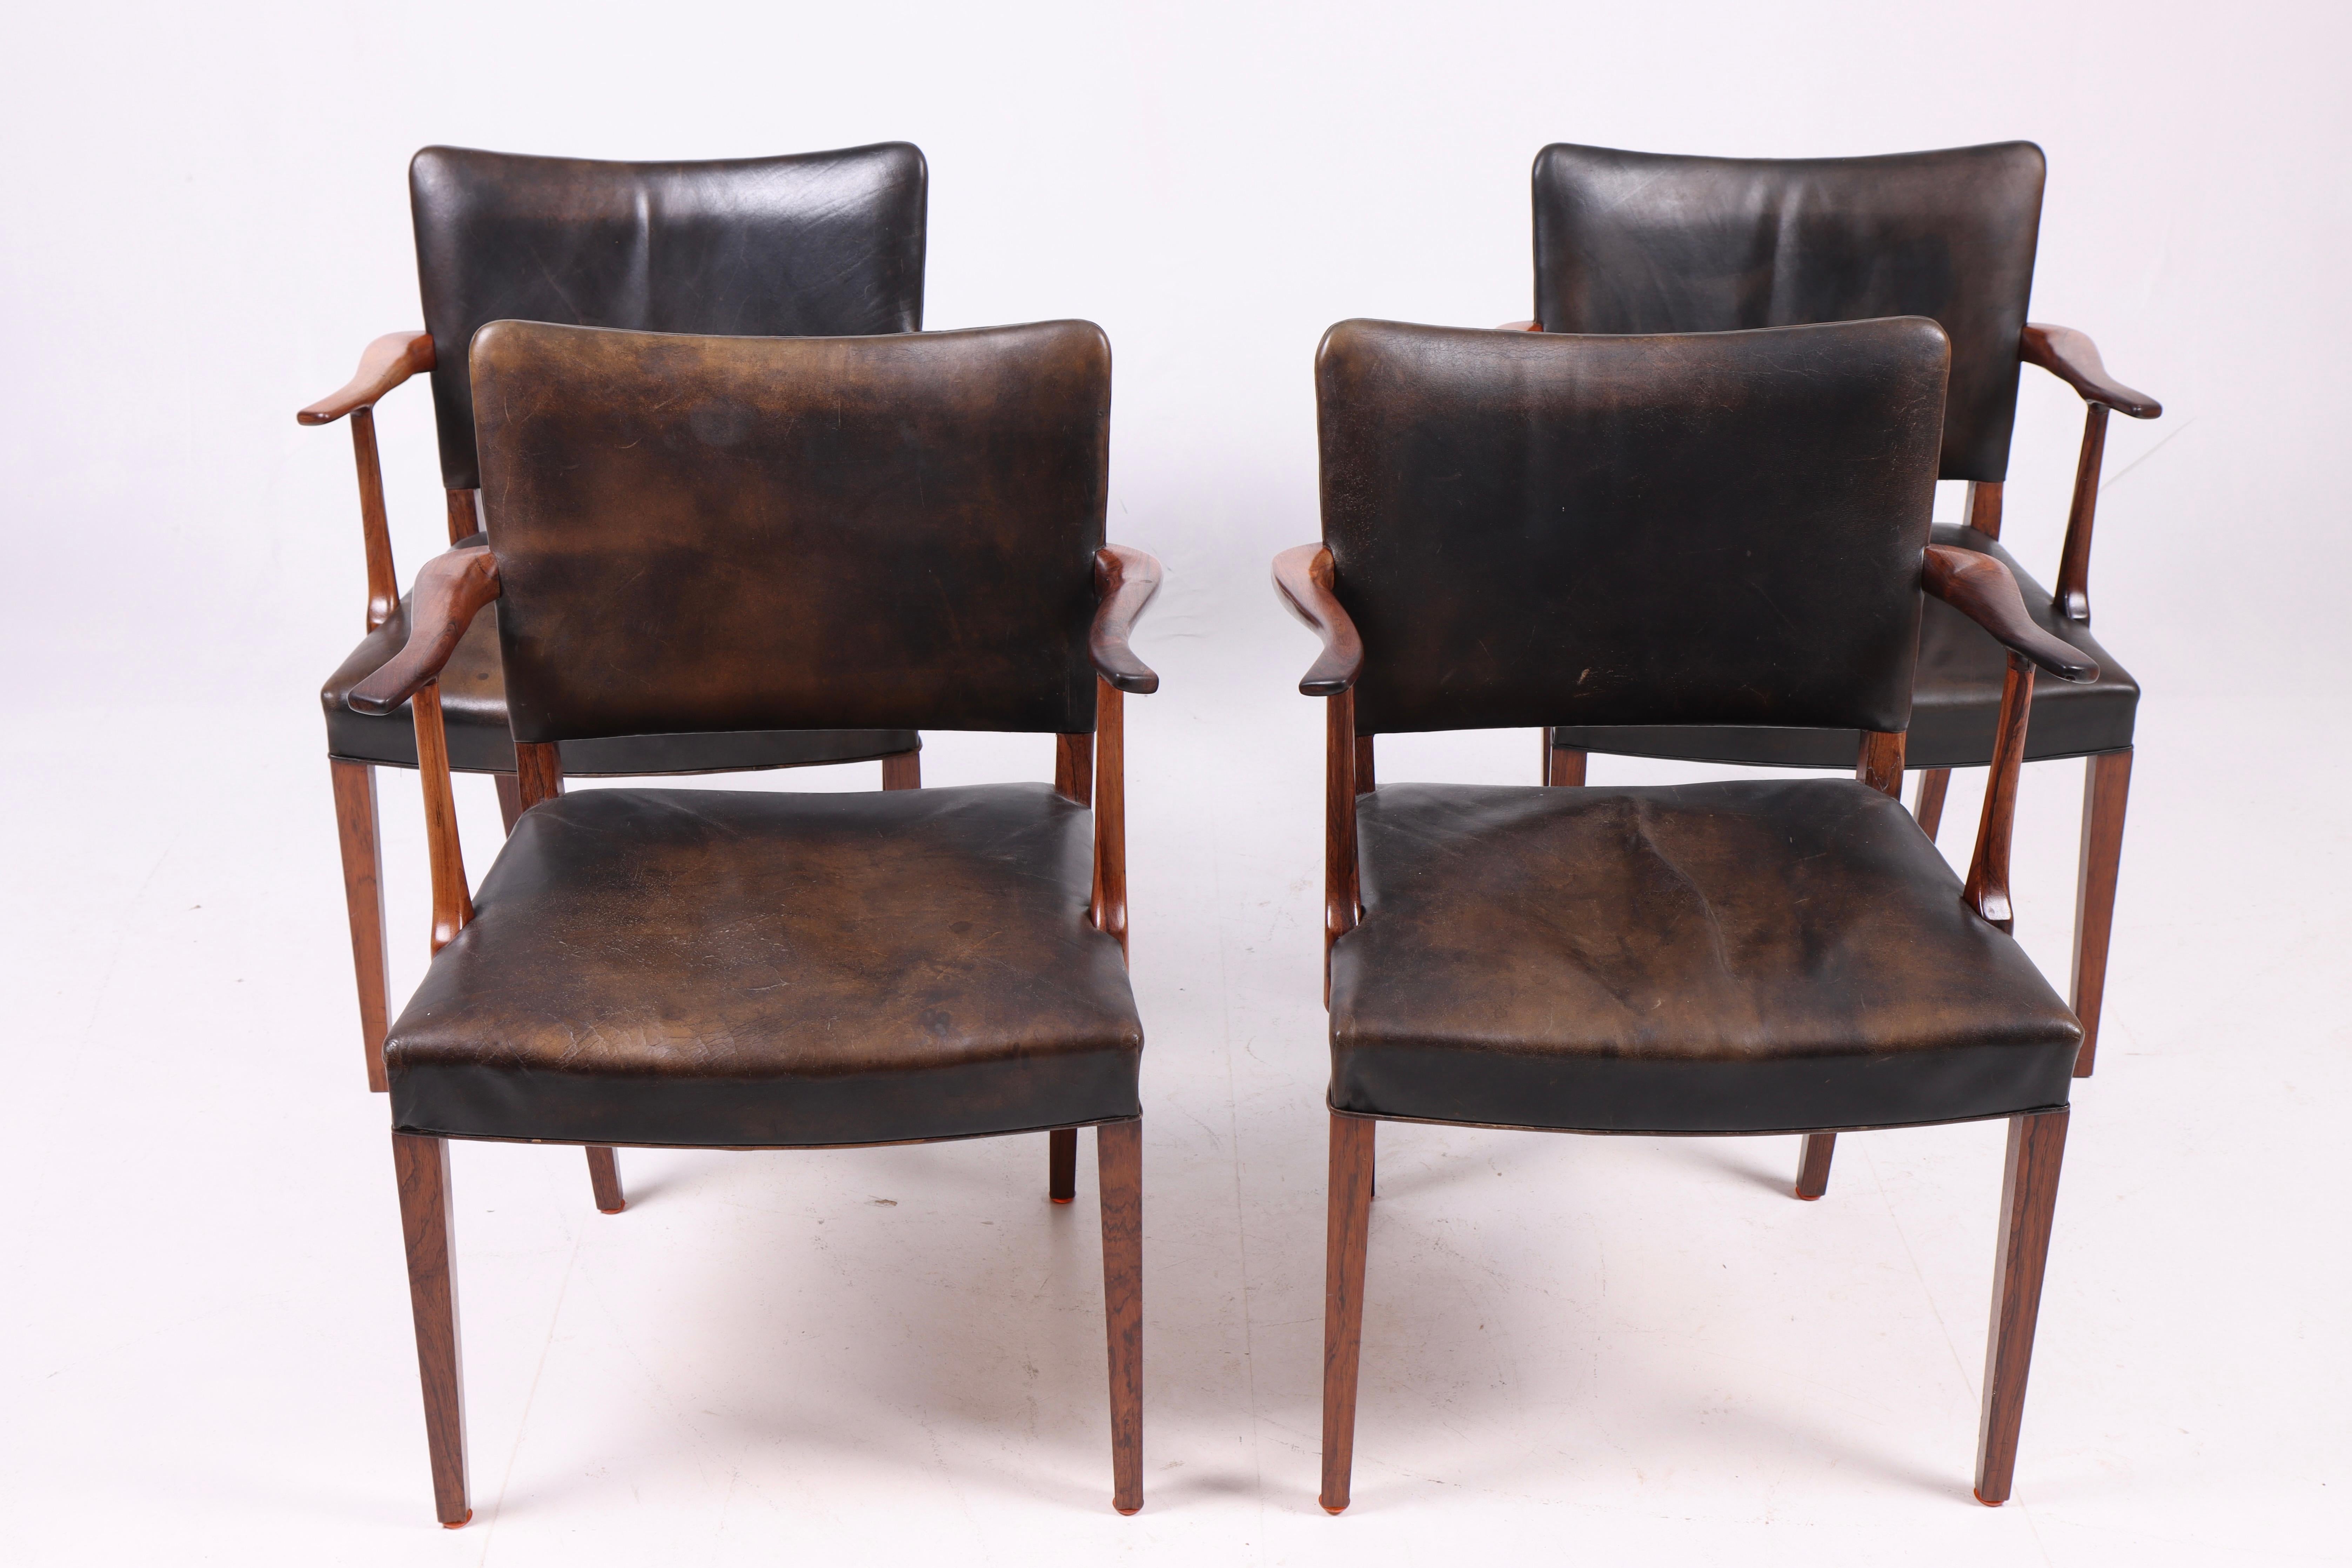 Set of four armchairs in rosewood and patinated leather designed and made by Rasmus Nielsen in 1950s. Made in Denmark. Great condition.